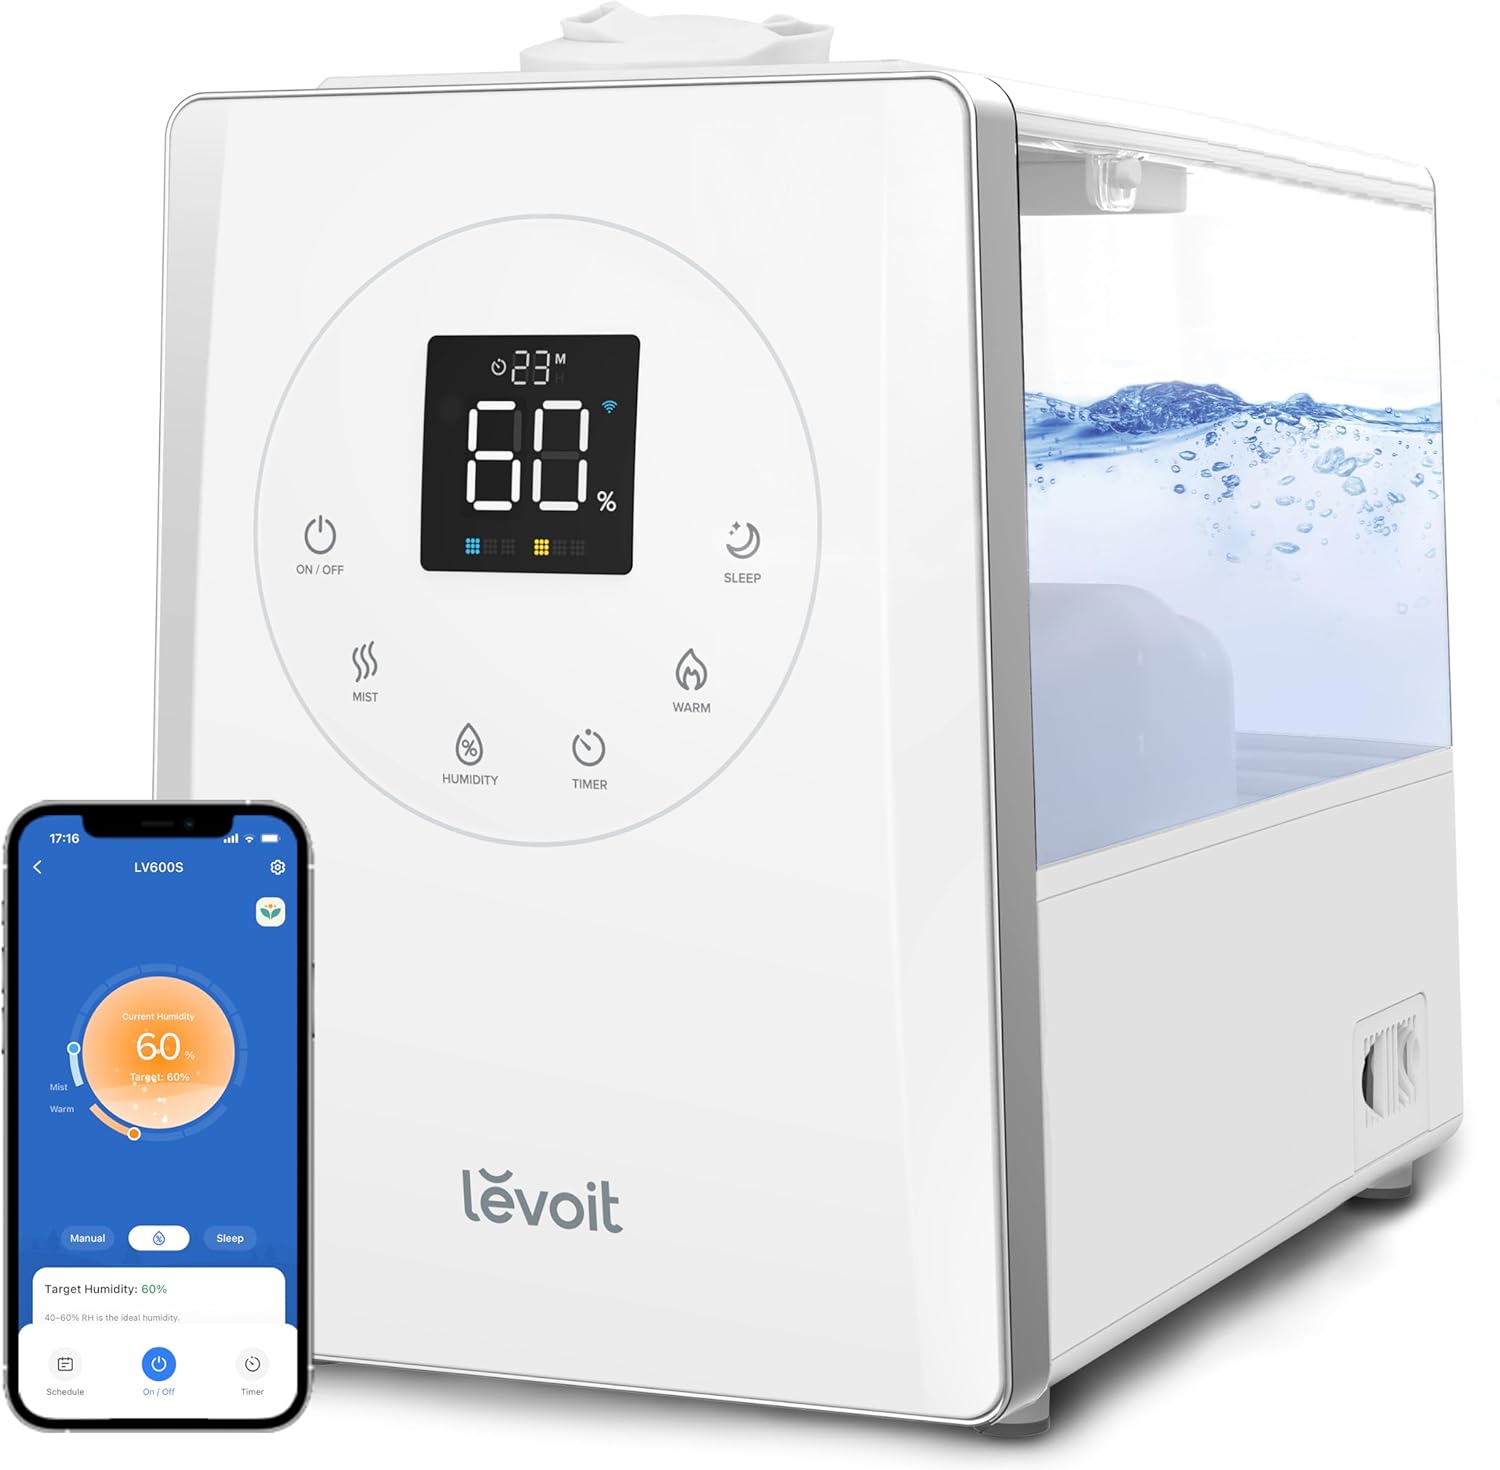 LEVOIT LV600S Smart Warm and Cool Mist Humidifiers for Home Bedroom Large Room, (6L) 753ft Coverage, Quickly & Evenly Humidify Whole House, Easy Top Fill, App & Voice Control - Quiet Sleep Mode